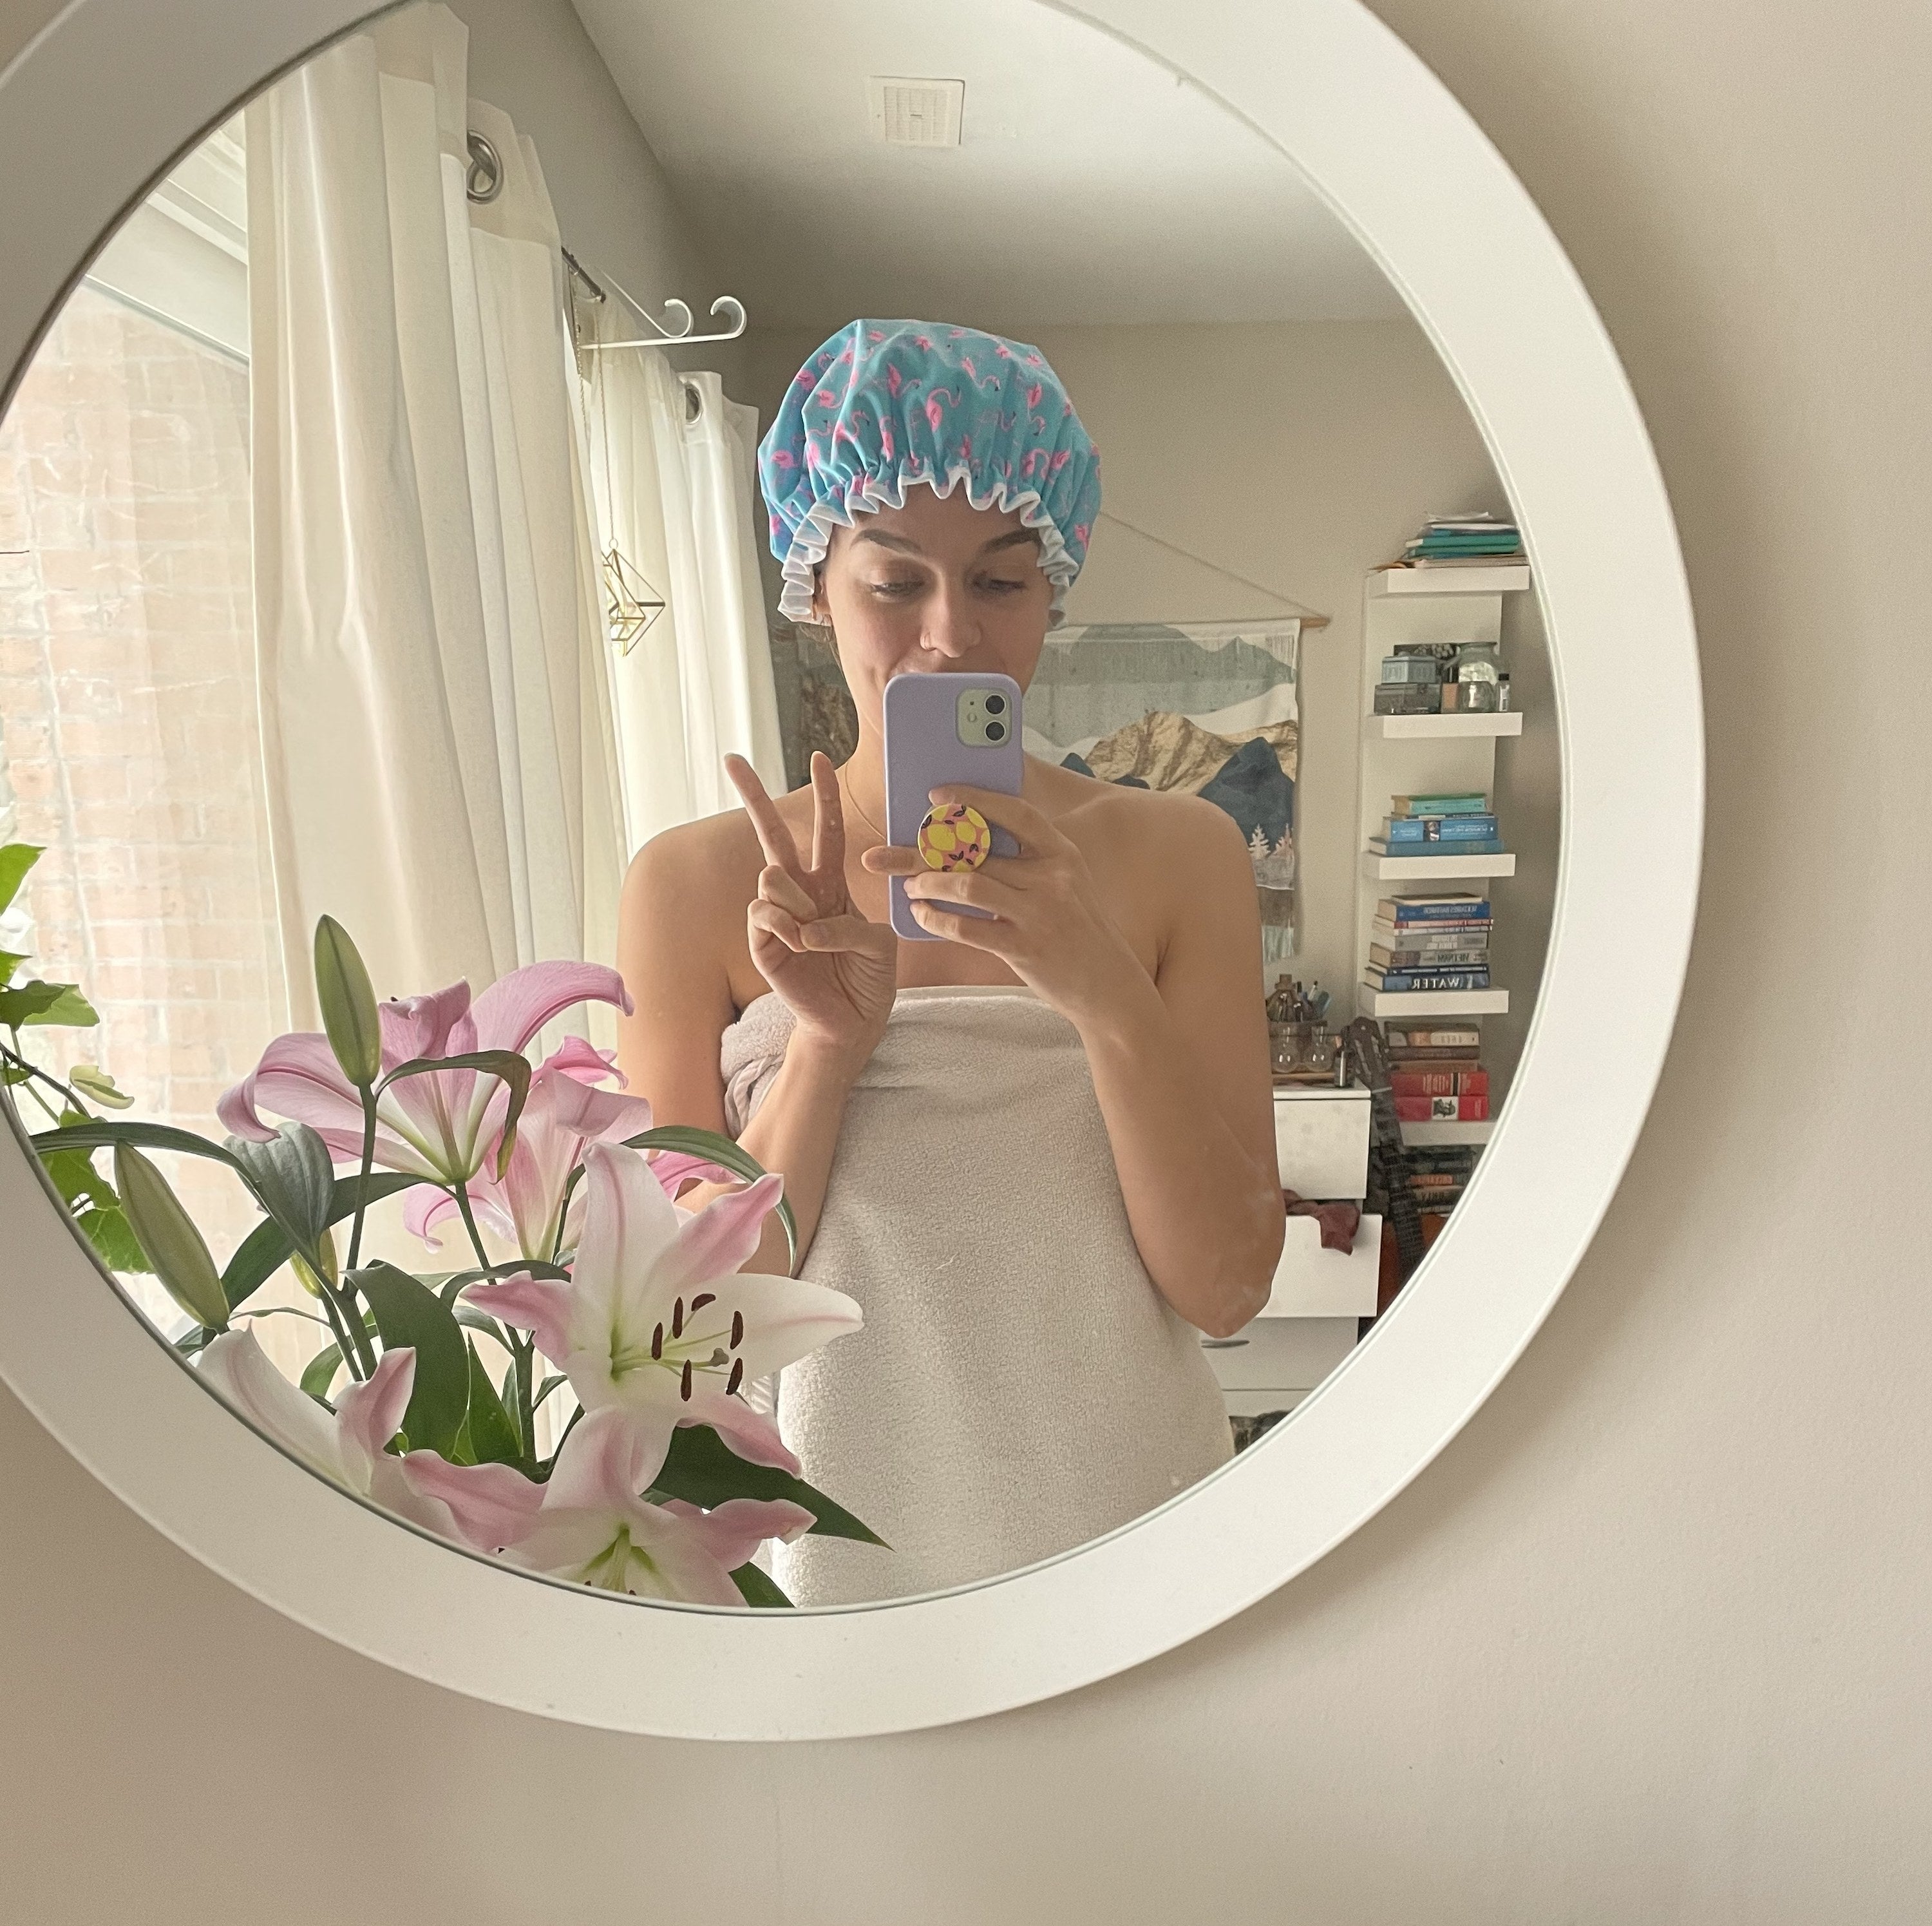 A person taking a selfie in a mirror in a towel wearing the shower cap 